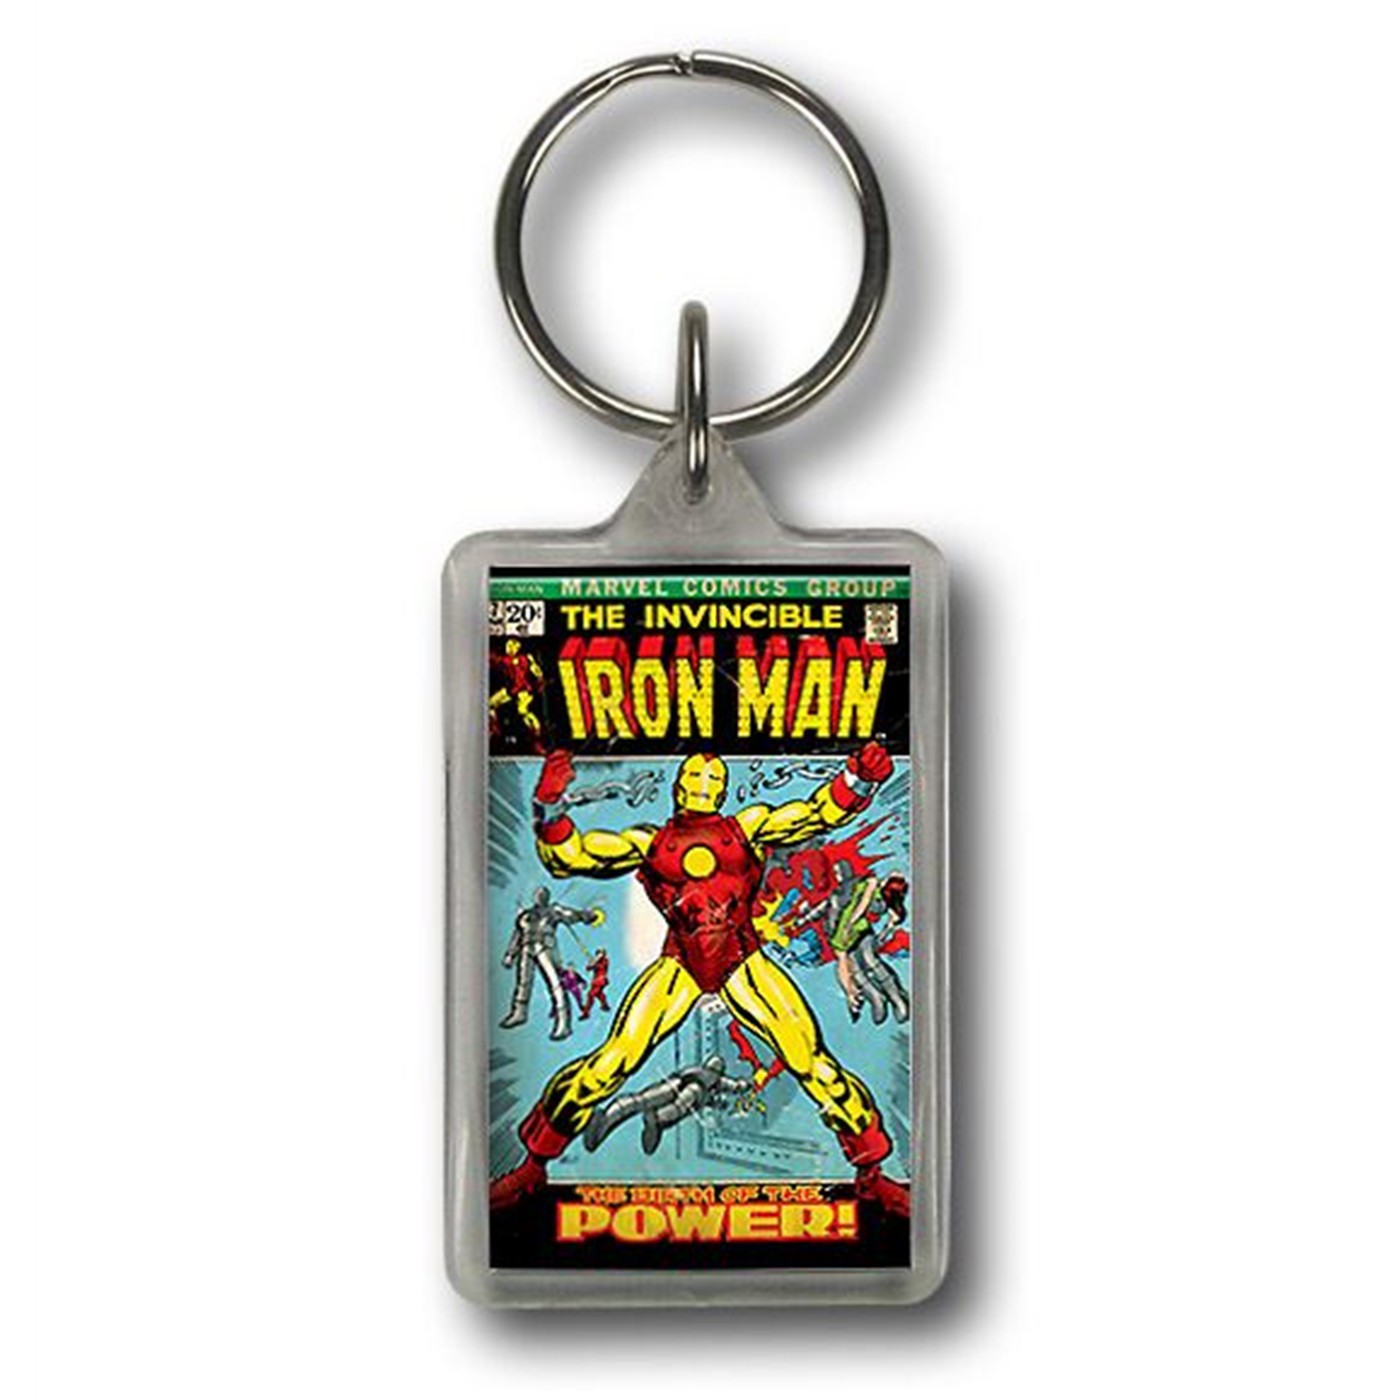 Iron Man Issue 47 Cover Lucite Keychain